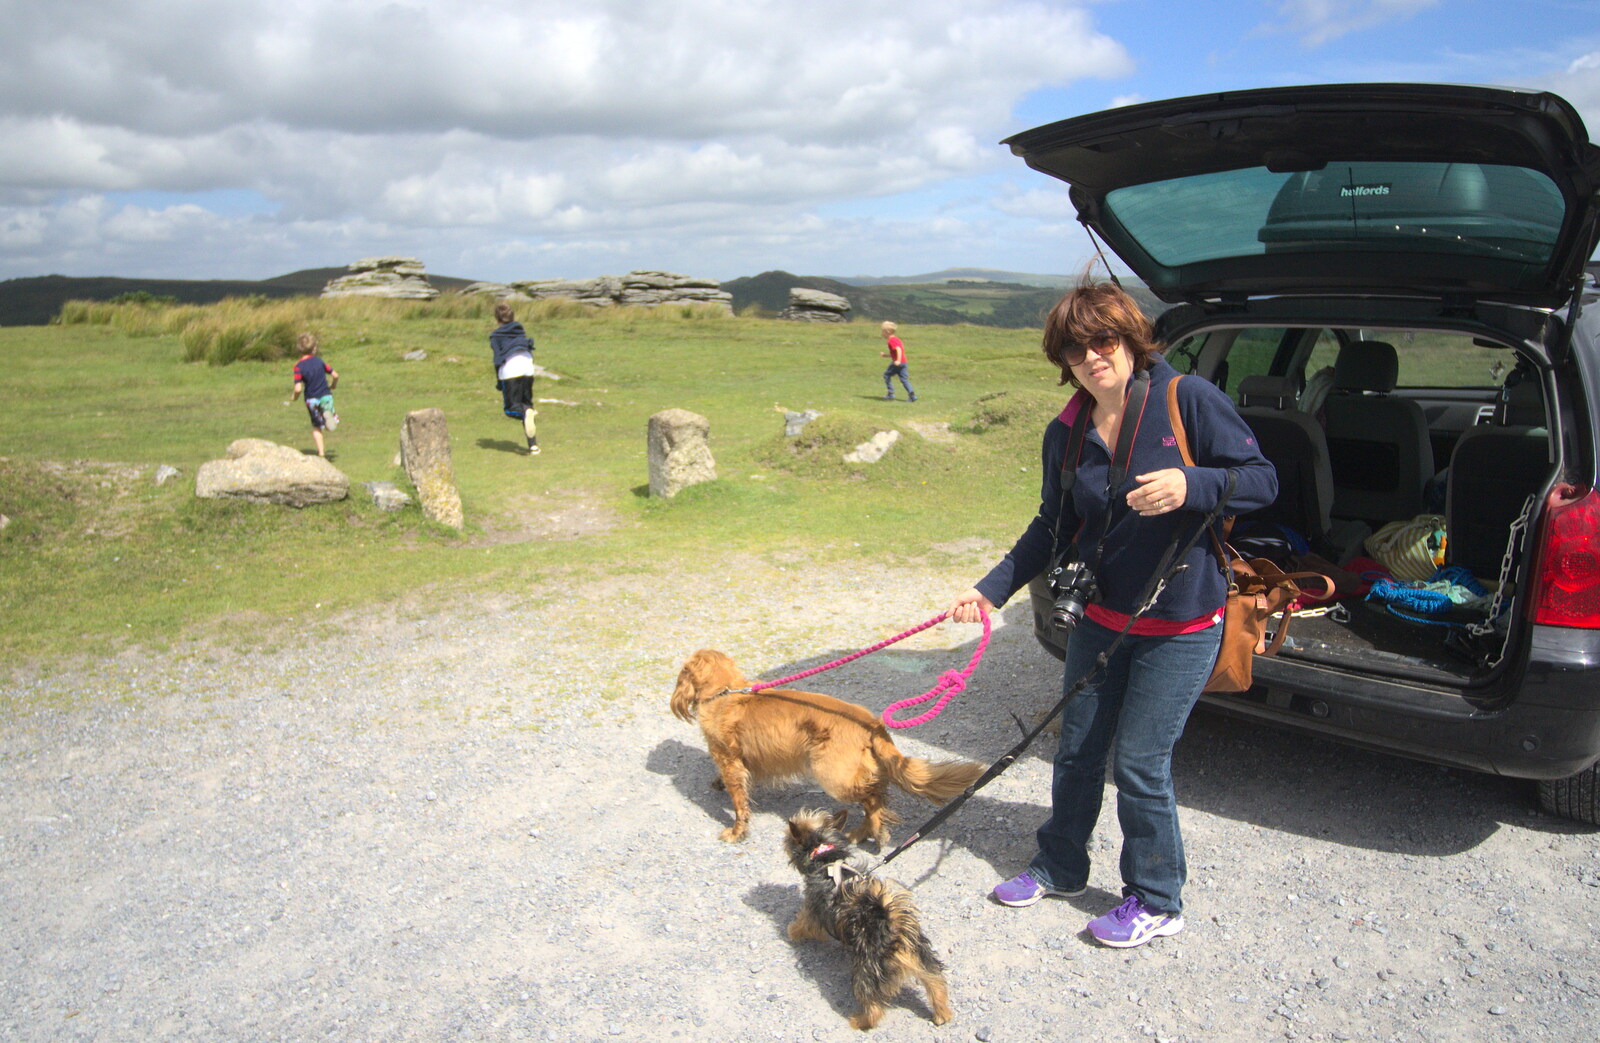 Michelle gets the dogs out from Badger's Holt and Bronze-Age Grimspound, Dartmoor, Devon - 10th August 2016